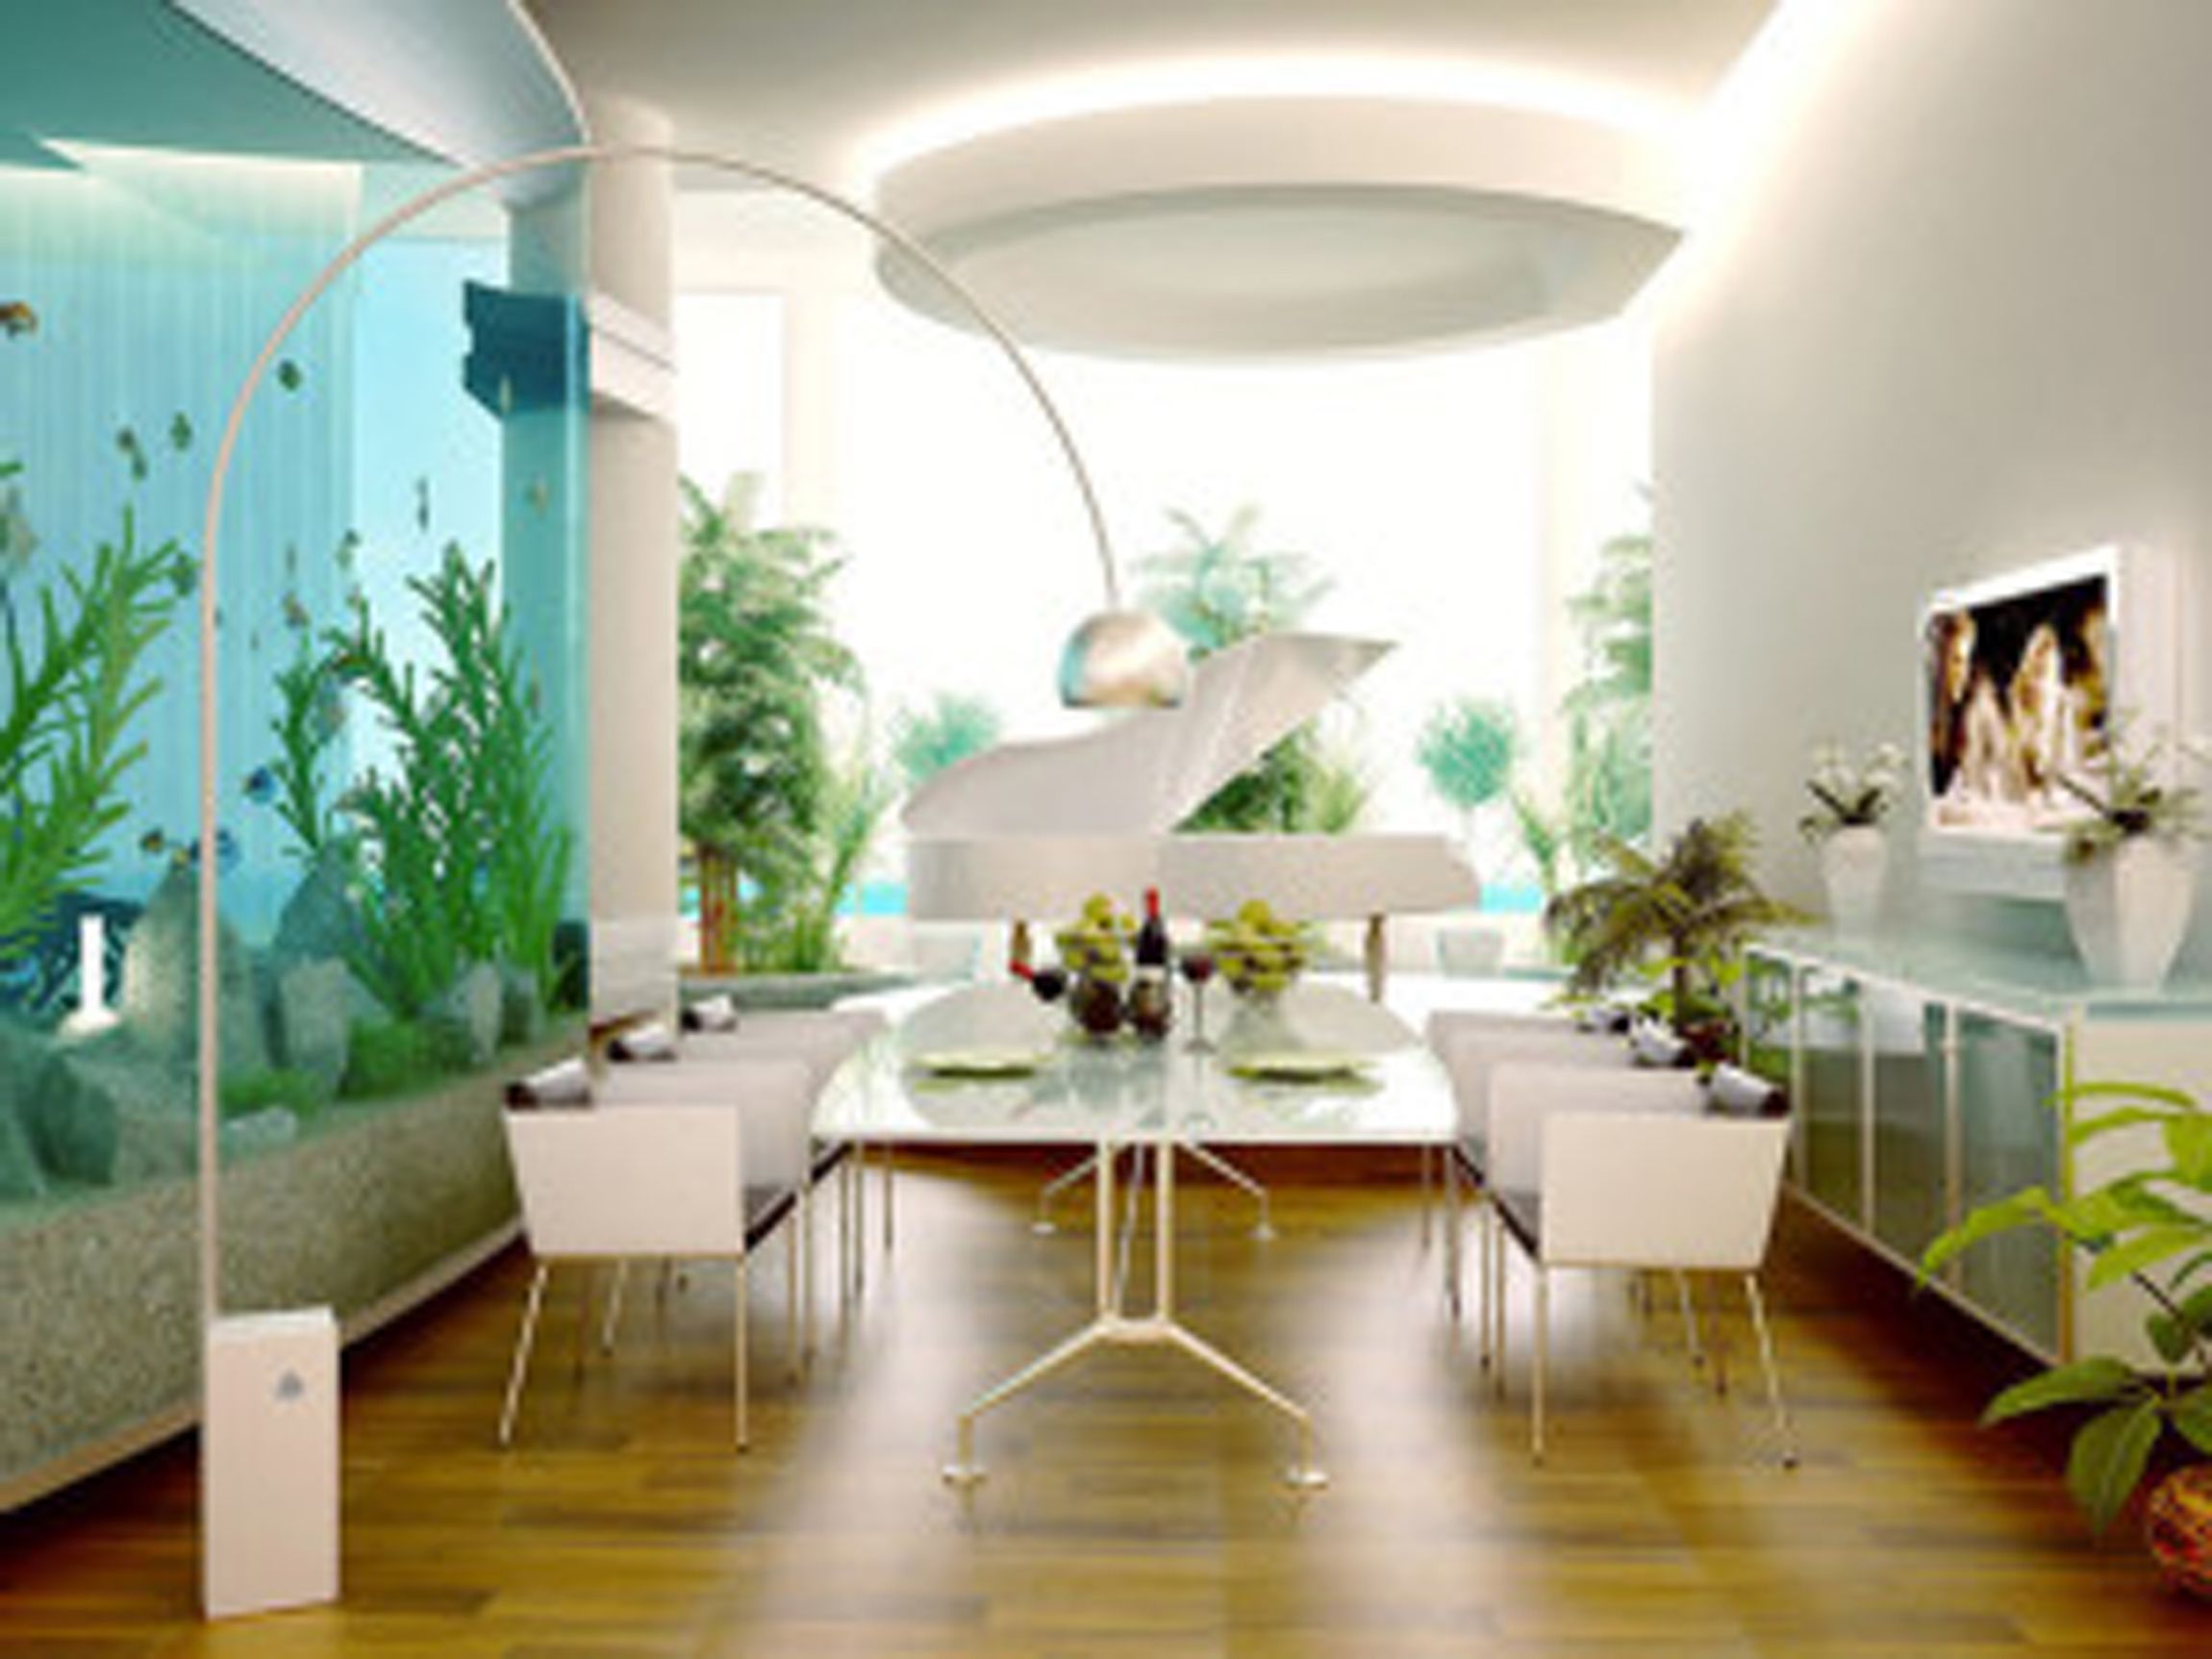 Stylish Dining Room Decoration With Aquarium And Wooden Floor And White Floor Lamps And White Dining Room Sets Modern Dining Room Decoration Ideas Modern Dining Room (View 15 of 28)